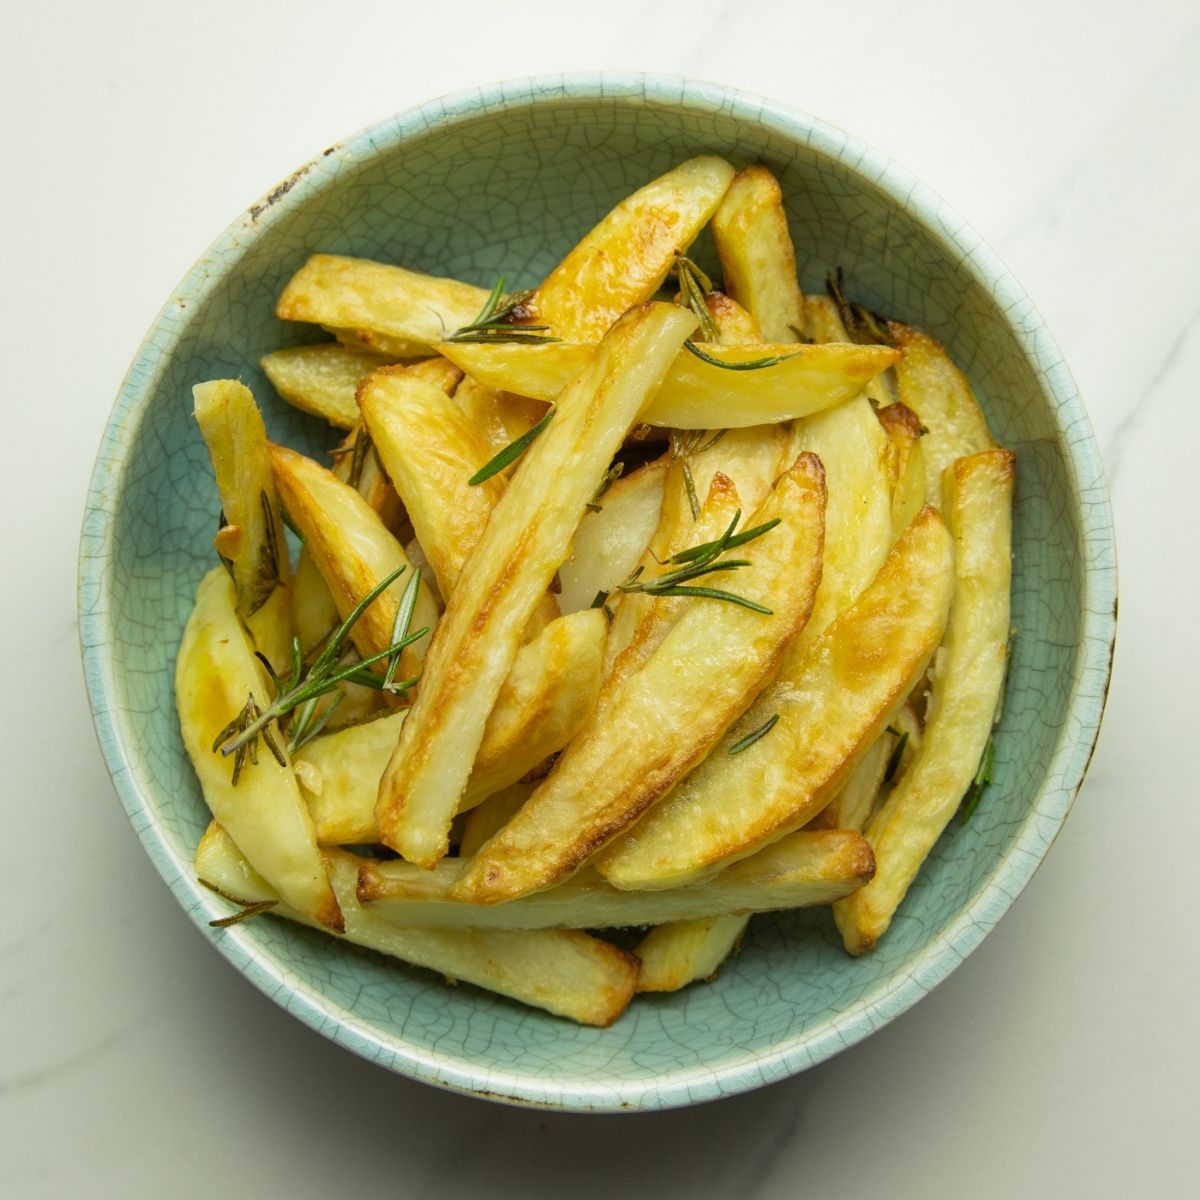 Healthy Oven Baked Fries